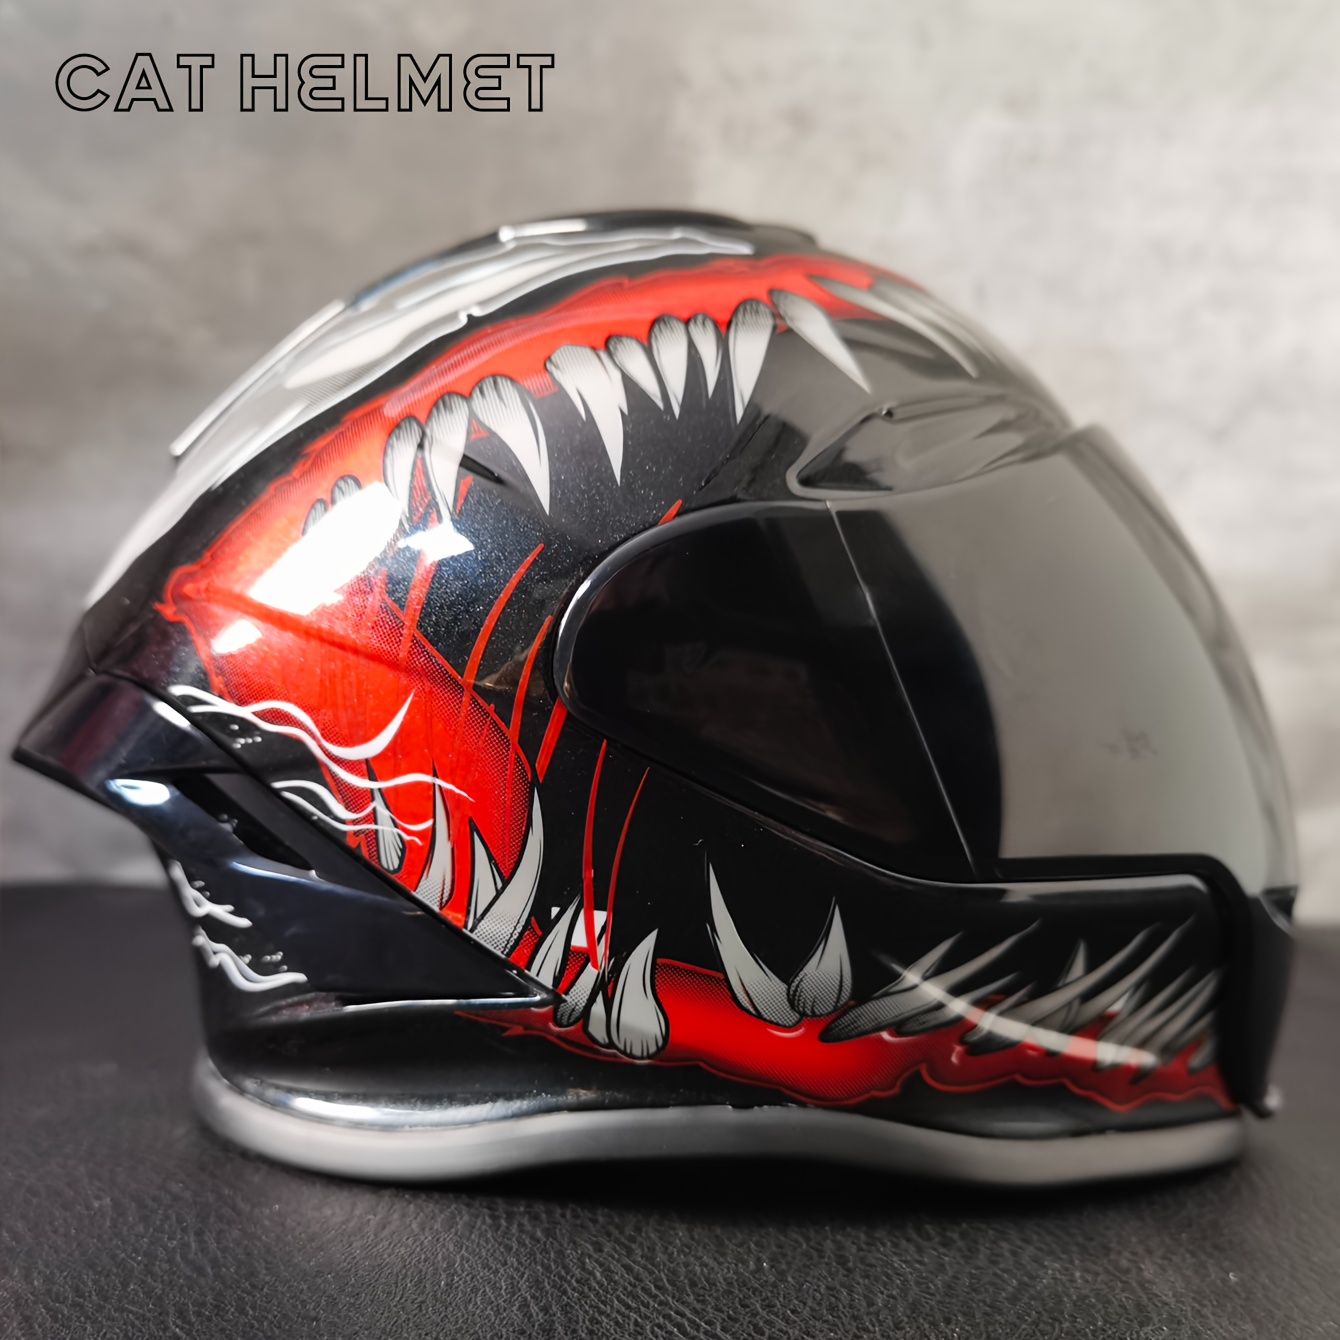 

Nbtk Monster Fangs Wild Themed Pet Helmet, Abs Material, Miniature Motorcycle Full Helmet For Cats And Dogs, Cool Safety Headgear With Replaceable Dual Visor Lengths